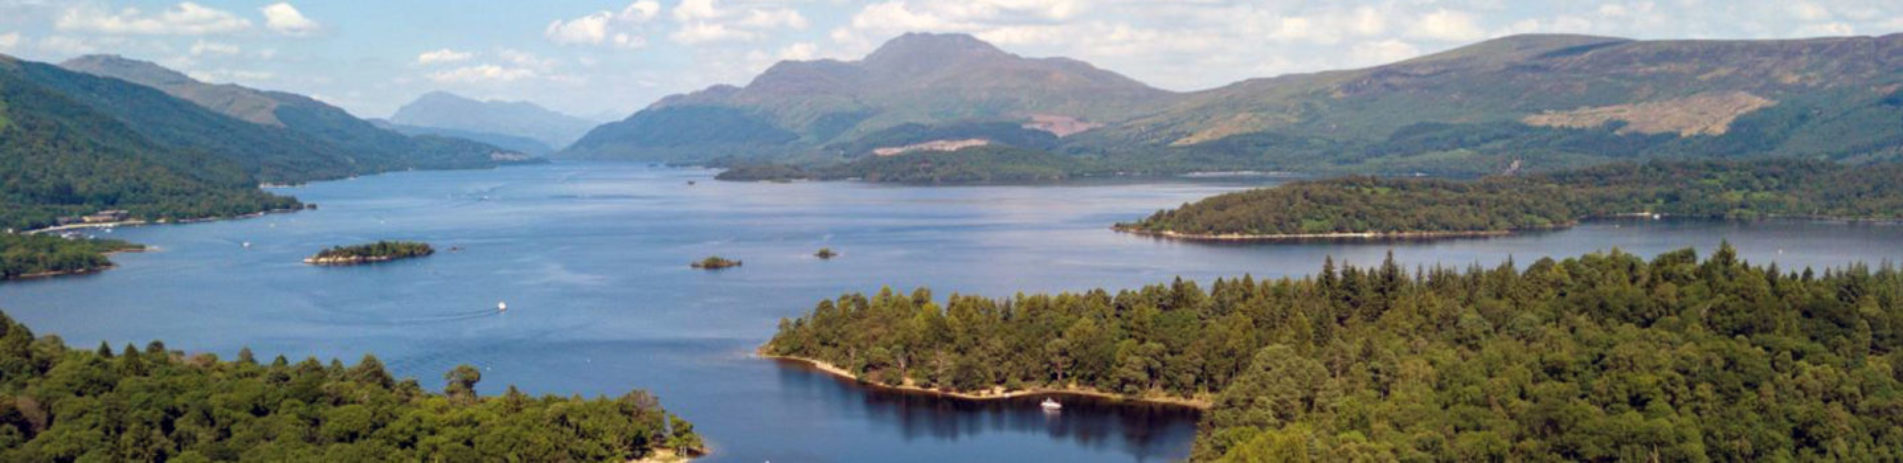 loch-lomond-aerial-photo-with-forested-islands-and-ben-lomond-visible-in-the-distance